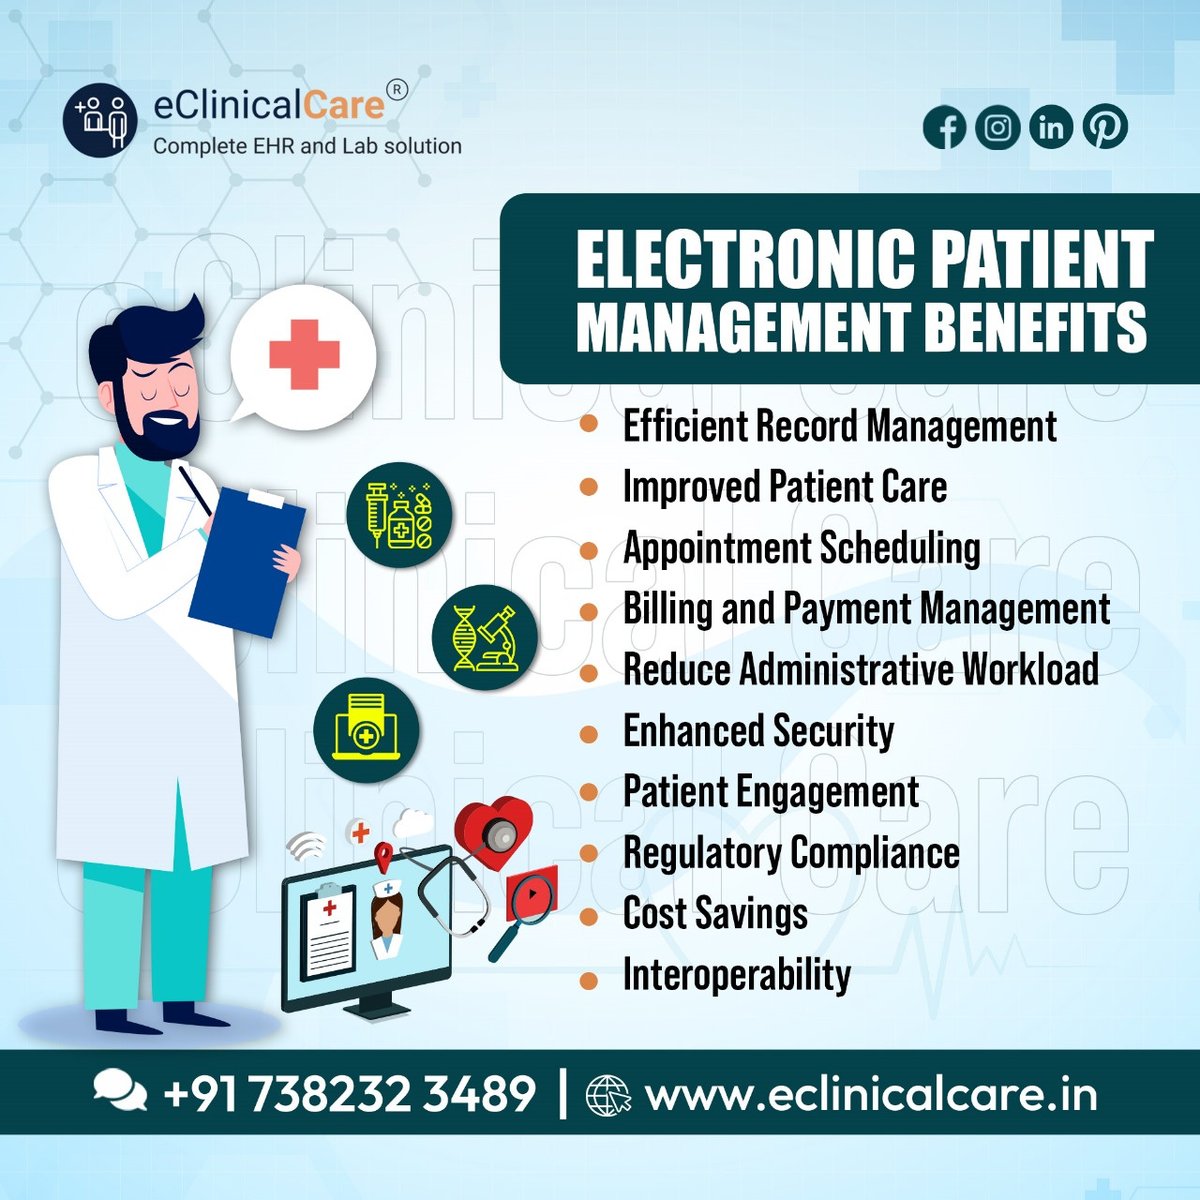 Experience the Future of Healthcare Management with eClinicalCare EHR Software!
Discover the power of advanced healthcare technology with eClinicalCare EHR Software!

#HealthTech #EHR #eClinicalCare #PatientEngagement #Compliance #CostSaving  #Security #MedicalRecords